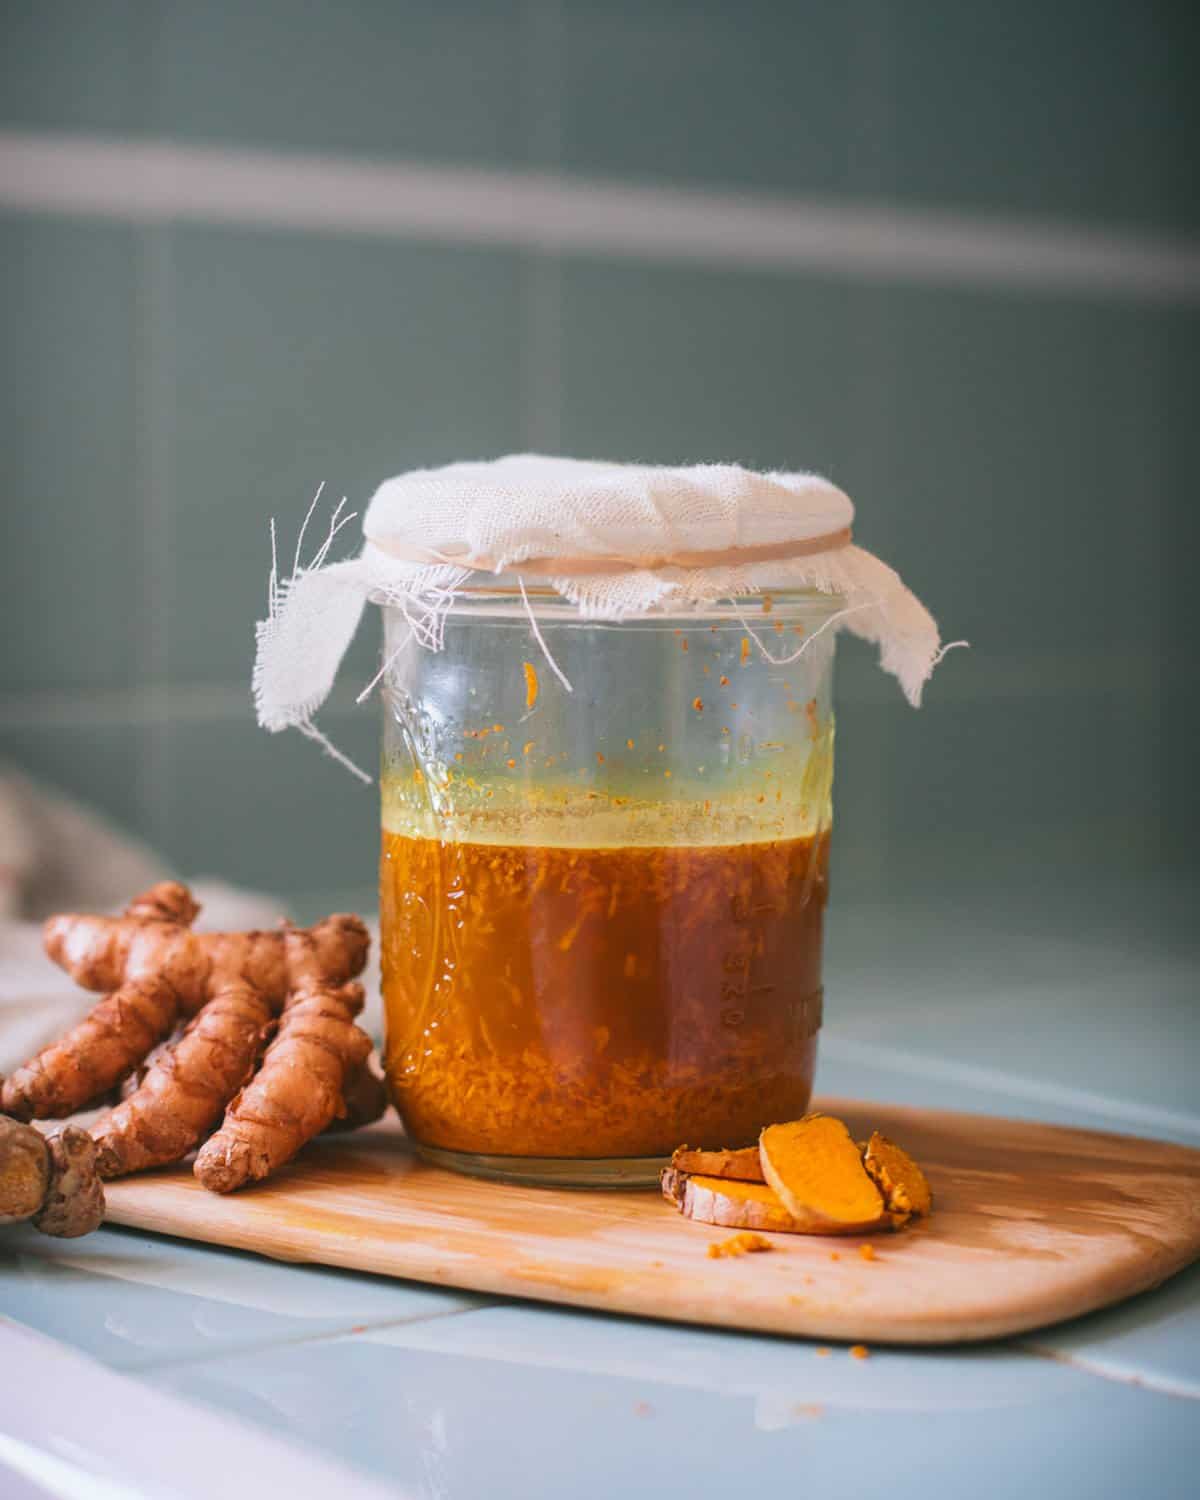 a jar of turmeric bug covered with a cheesecloth